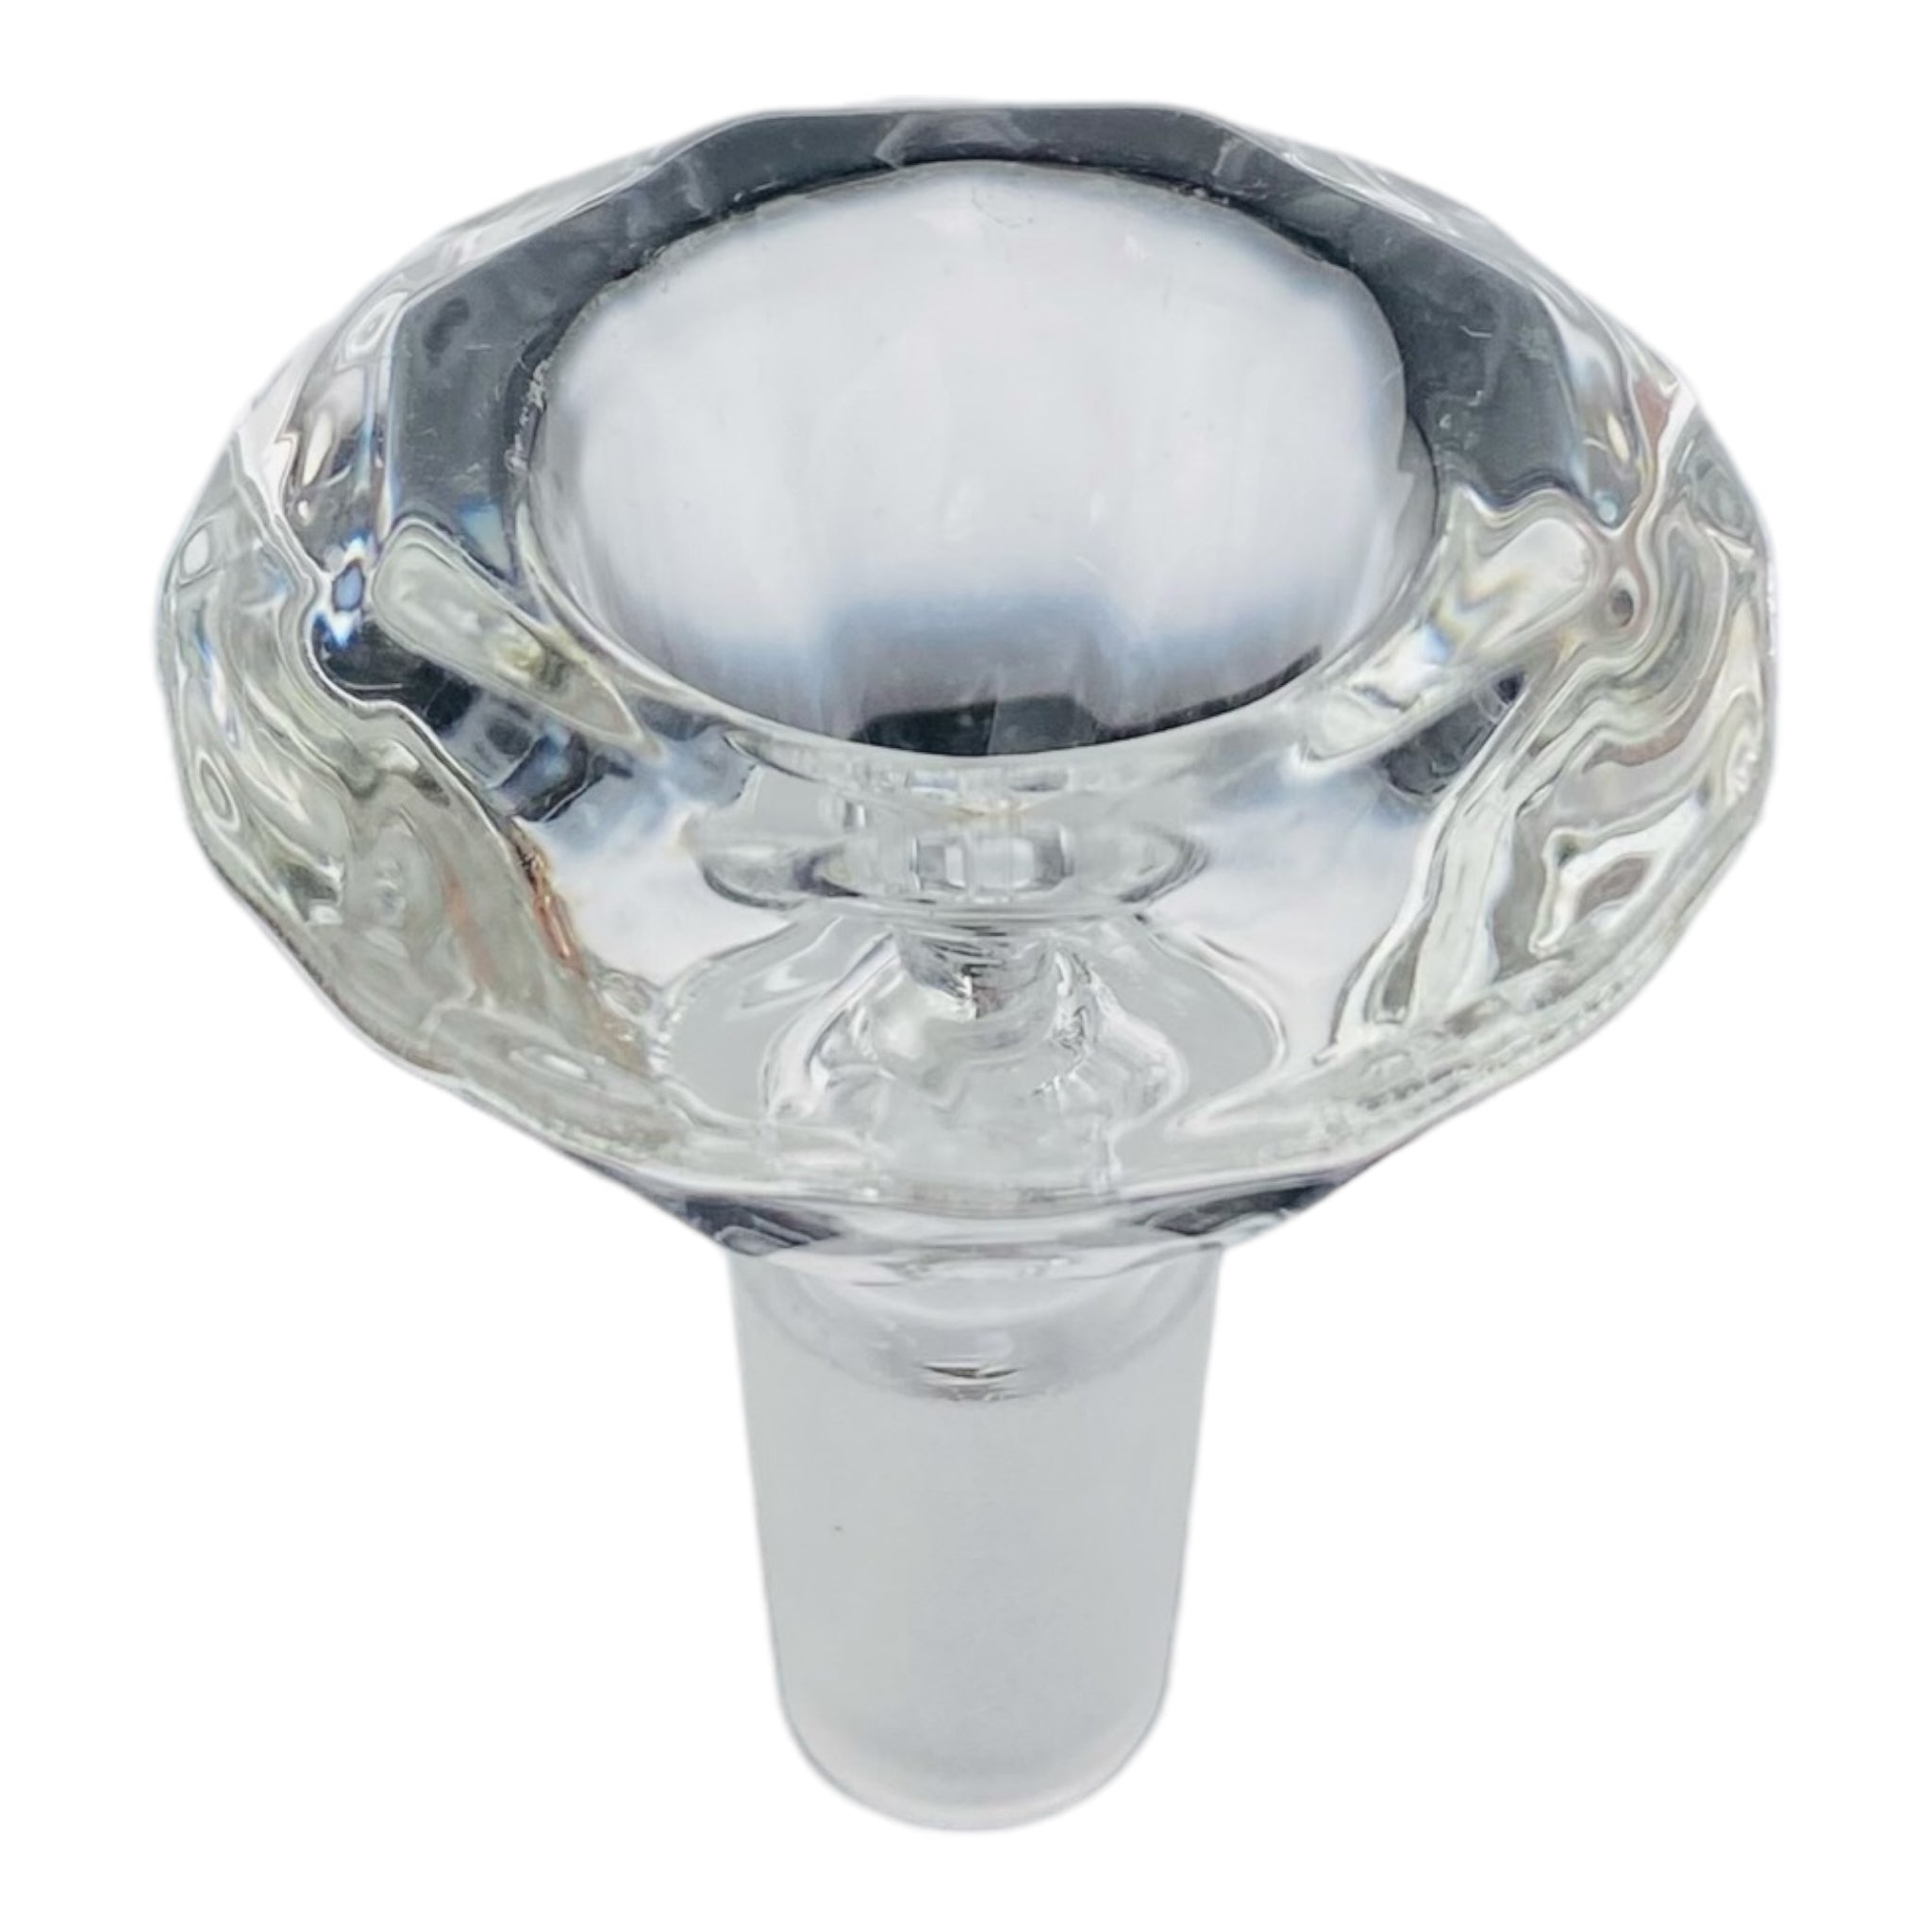 14mm Flower Bowl - Faceted Diamond Glass Bong Bowl Piece - Clear